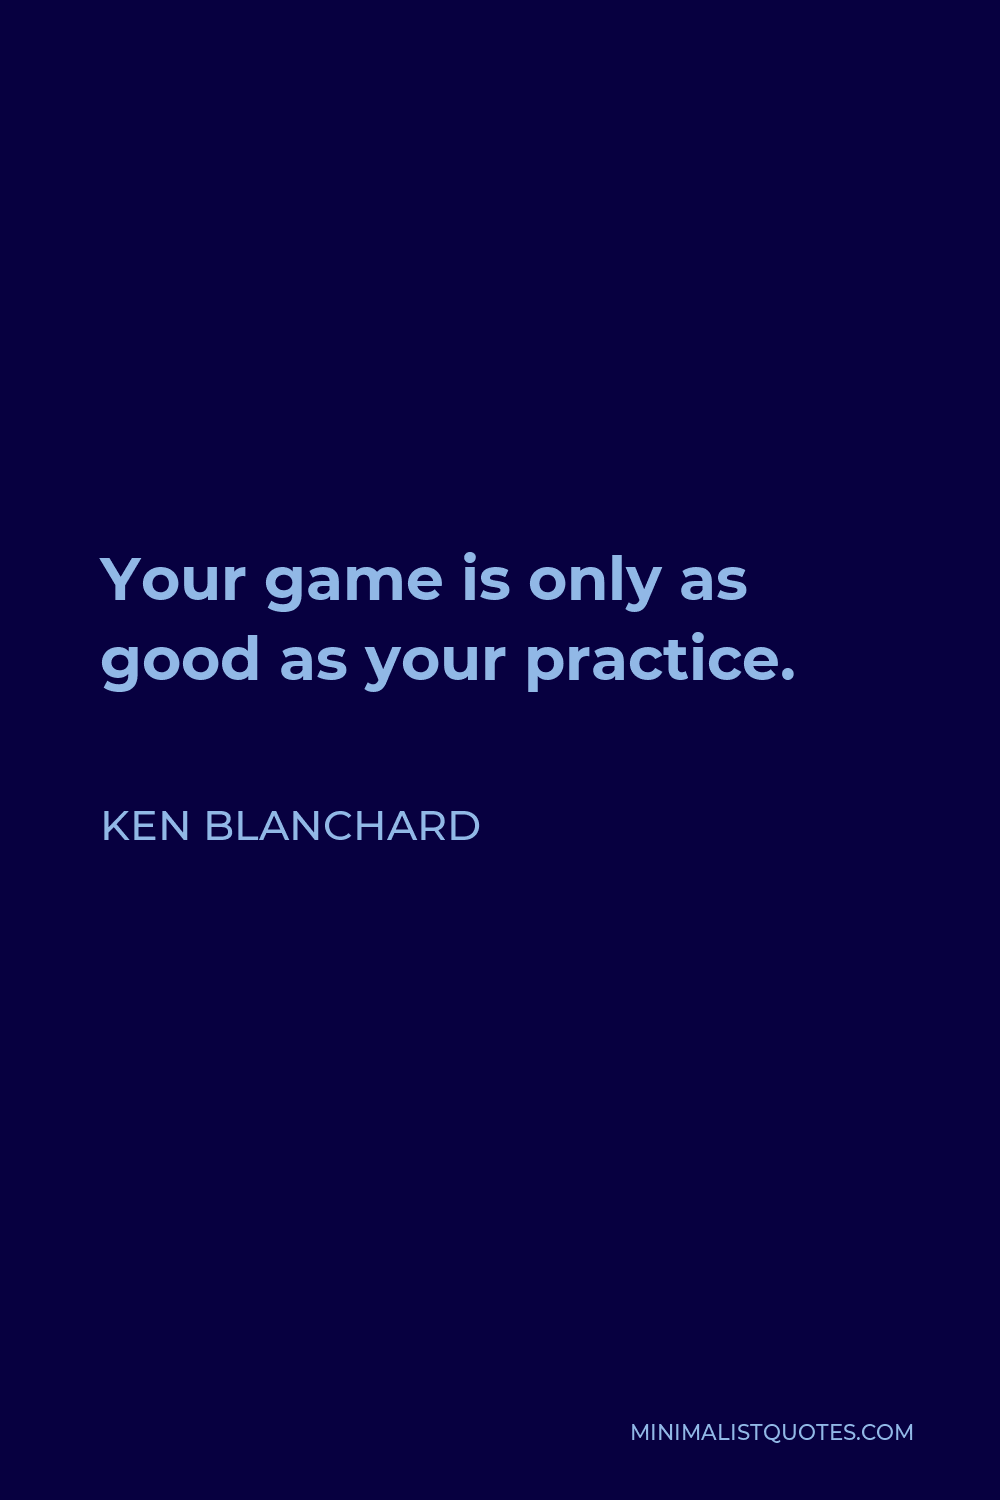 Ken Blanchard Quote - Your game is only as good as your practice.